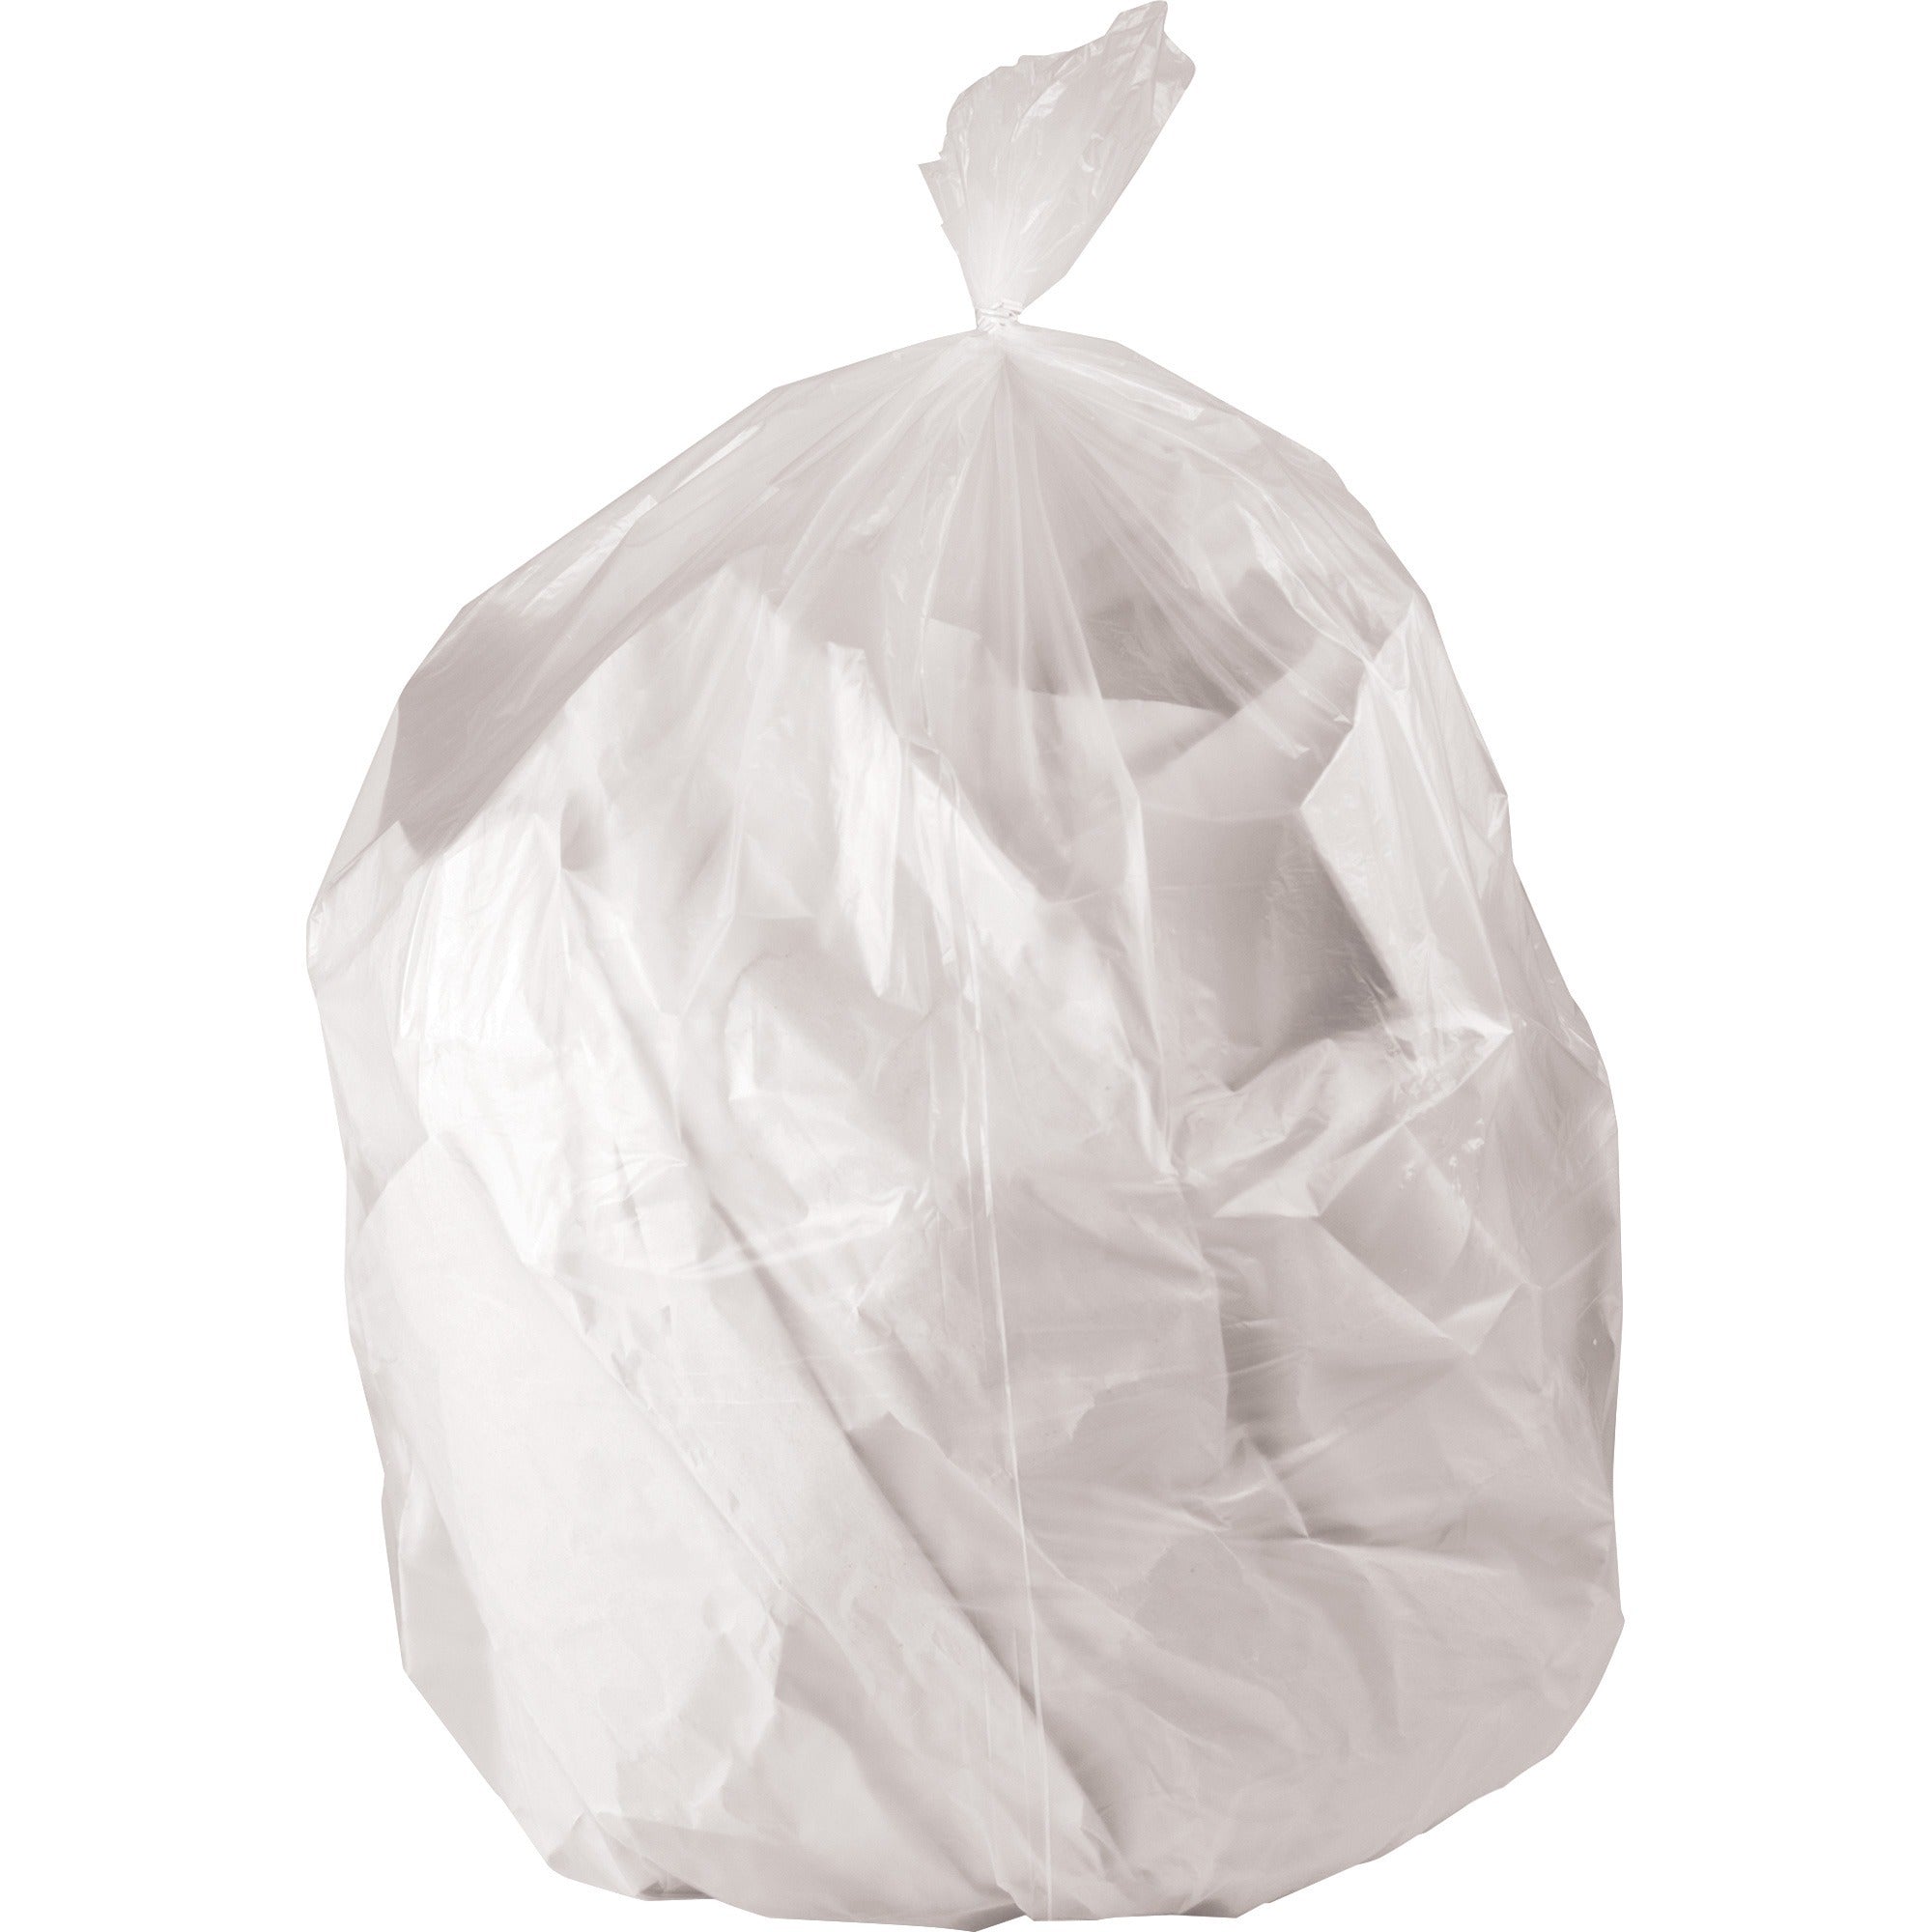 genuine-joe-strong-economical-trash-bags-56-gal-capacity-43-width-x-48-length-087-mil-22-micron-thickness-clear-resin-150-carton-waste-disposal_gjo02858 - 1